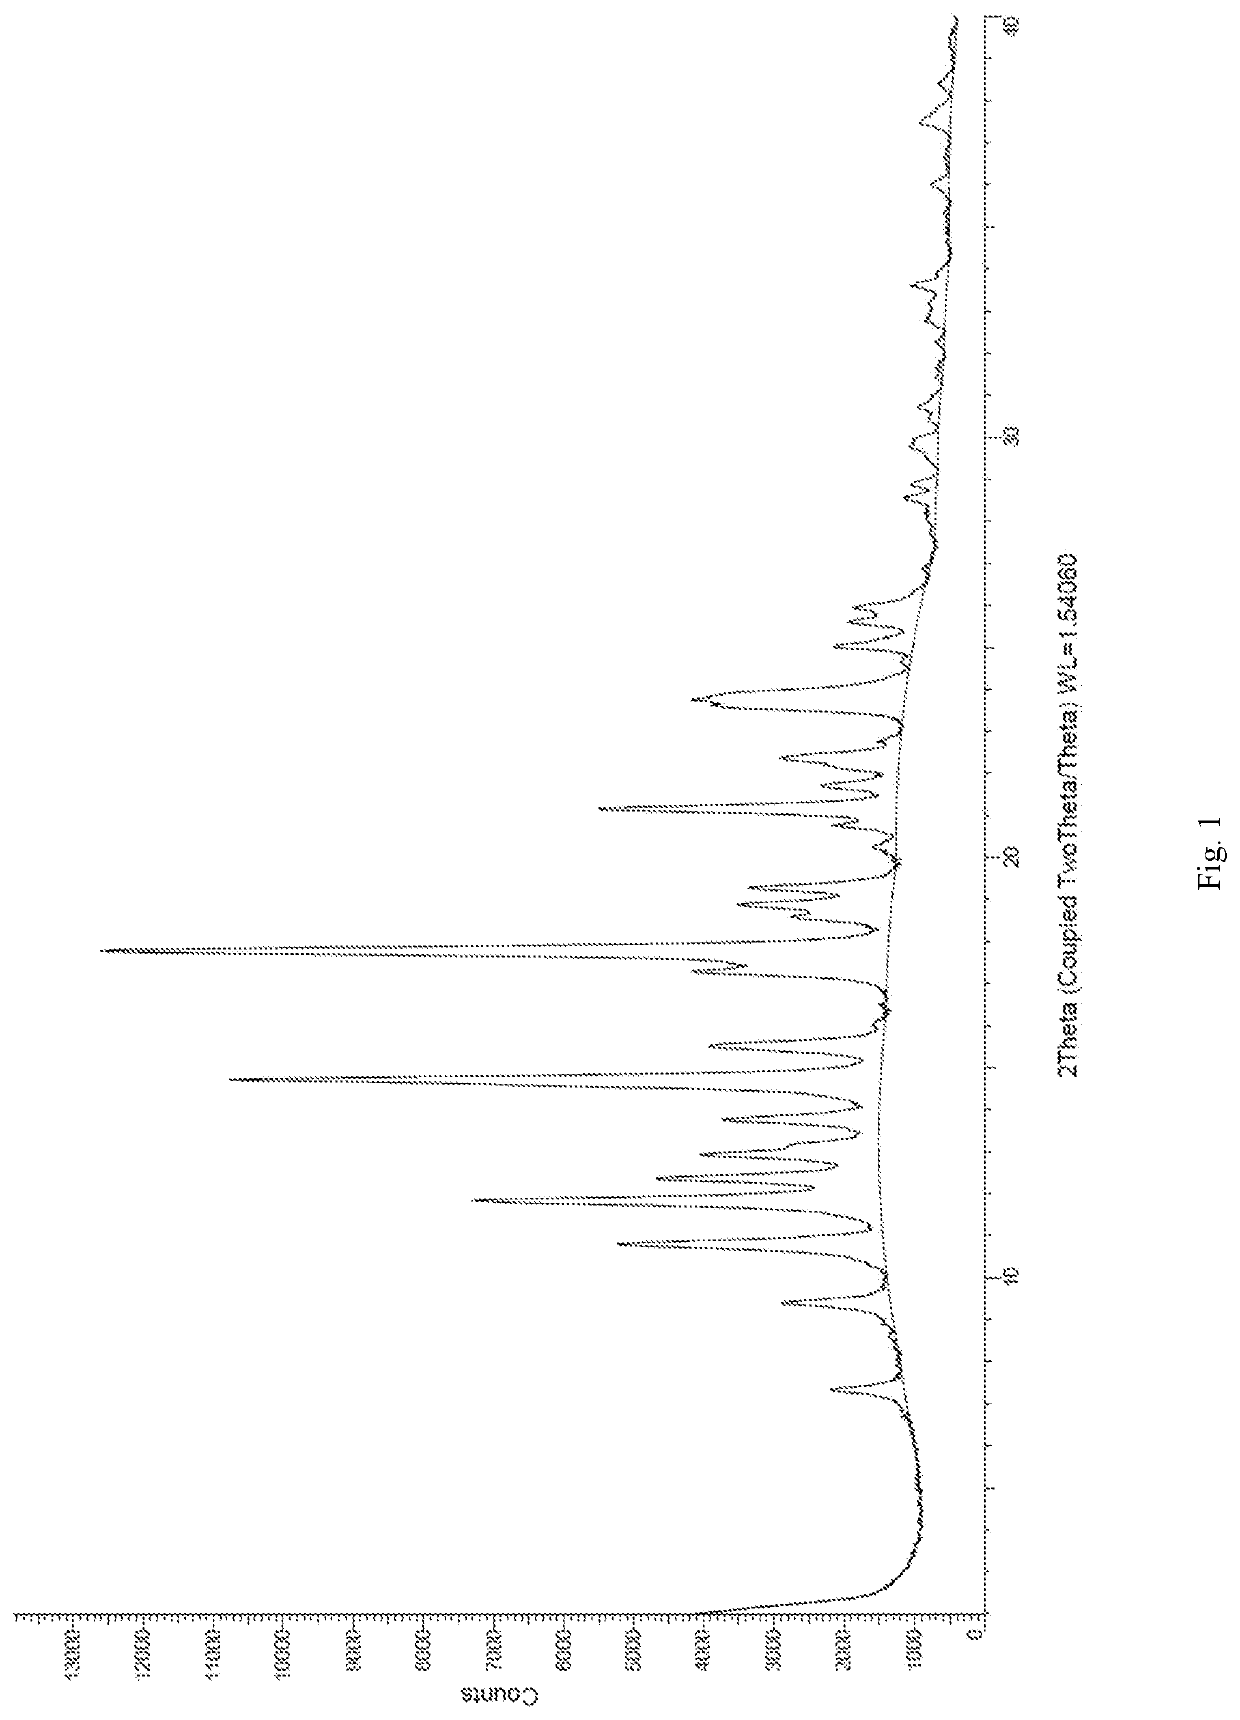 Novel naphthylenyl compounds for long-acting injectable compositions and related methods